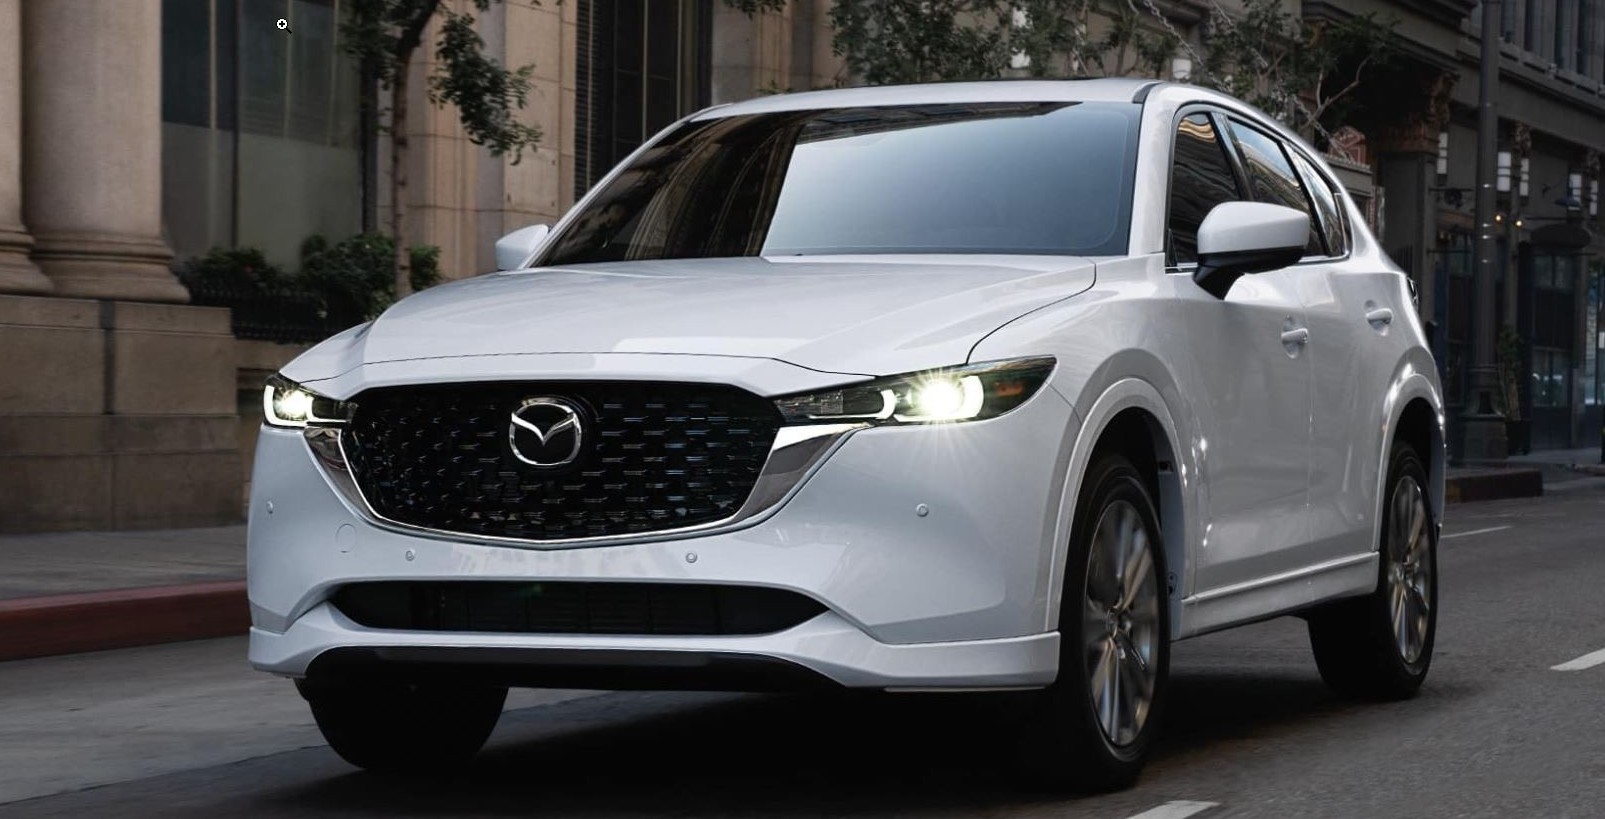 The new Mazda CX-5 2023 is the renewal of the successful SUV, and we are already thinking about the unprecedented third generation